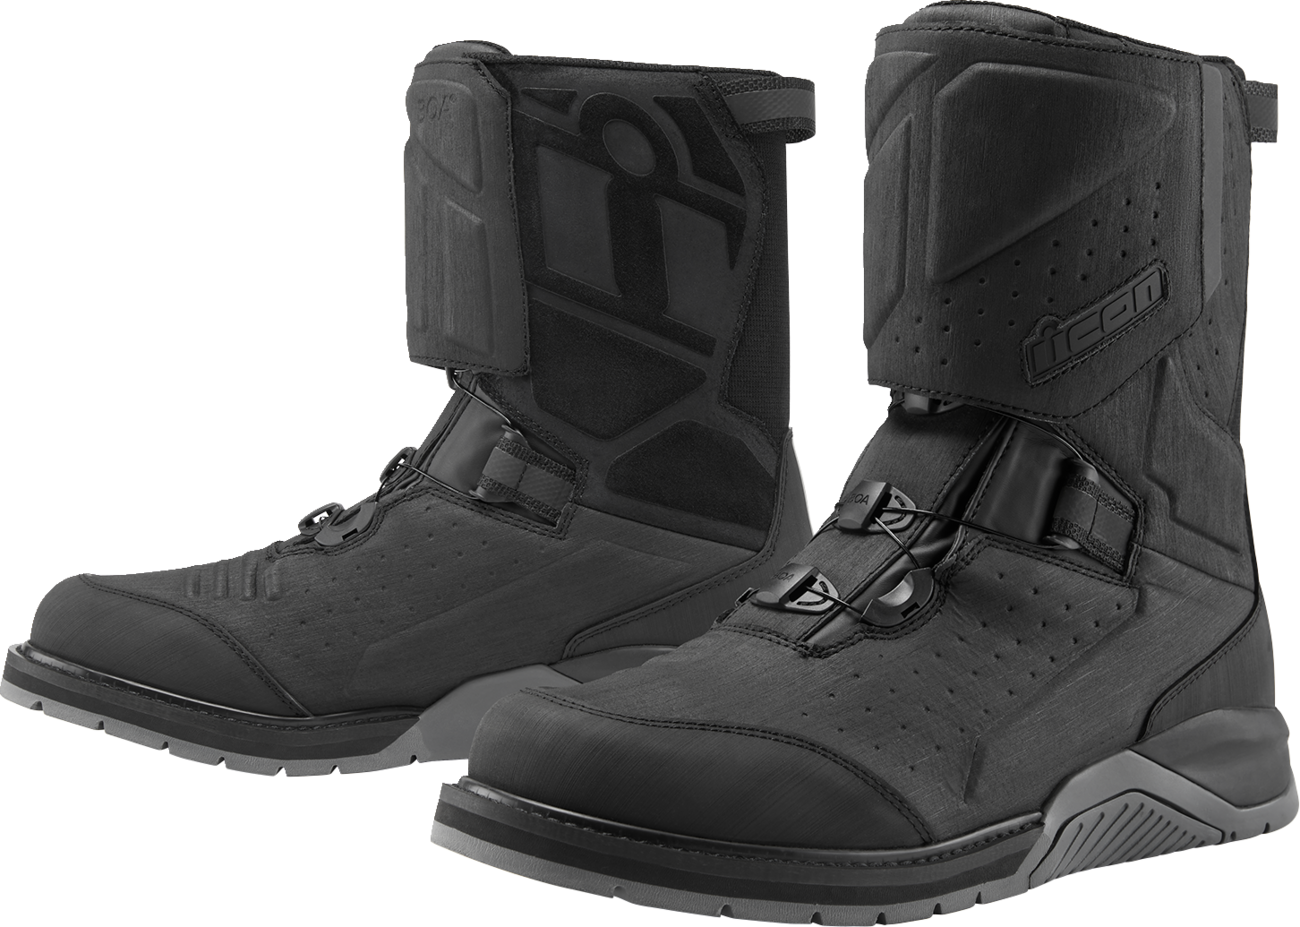 ICON Alcan Waterproof Boots - Black - Size 9.5 3403-1236